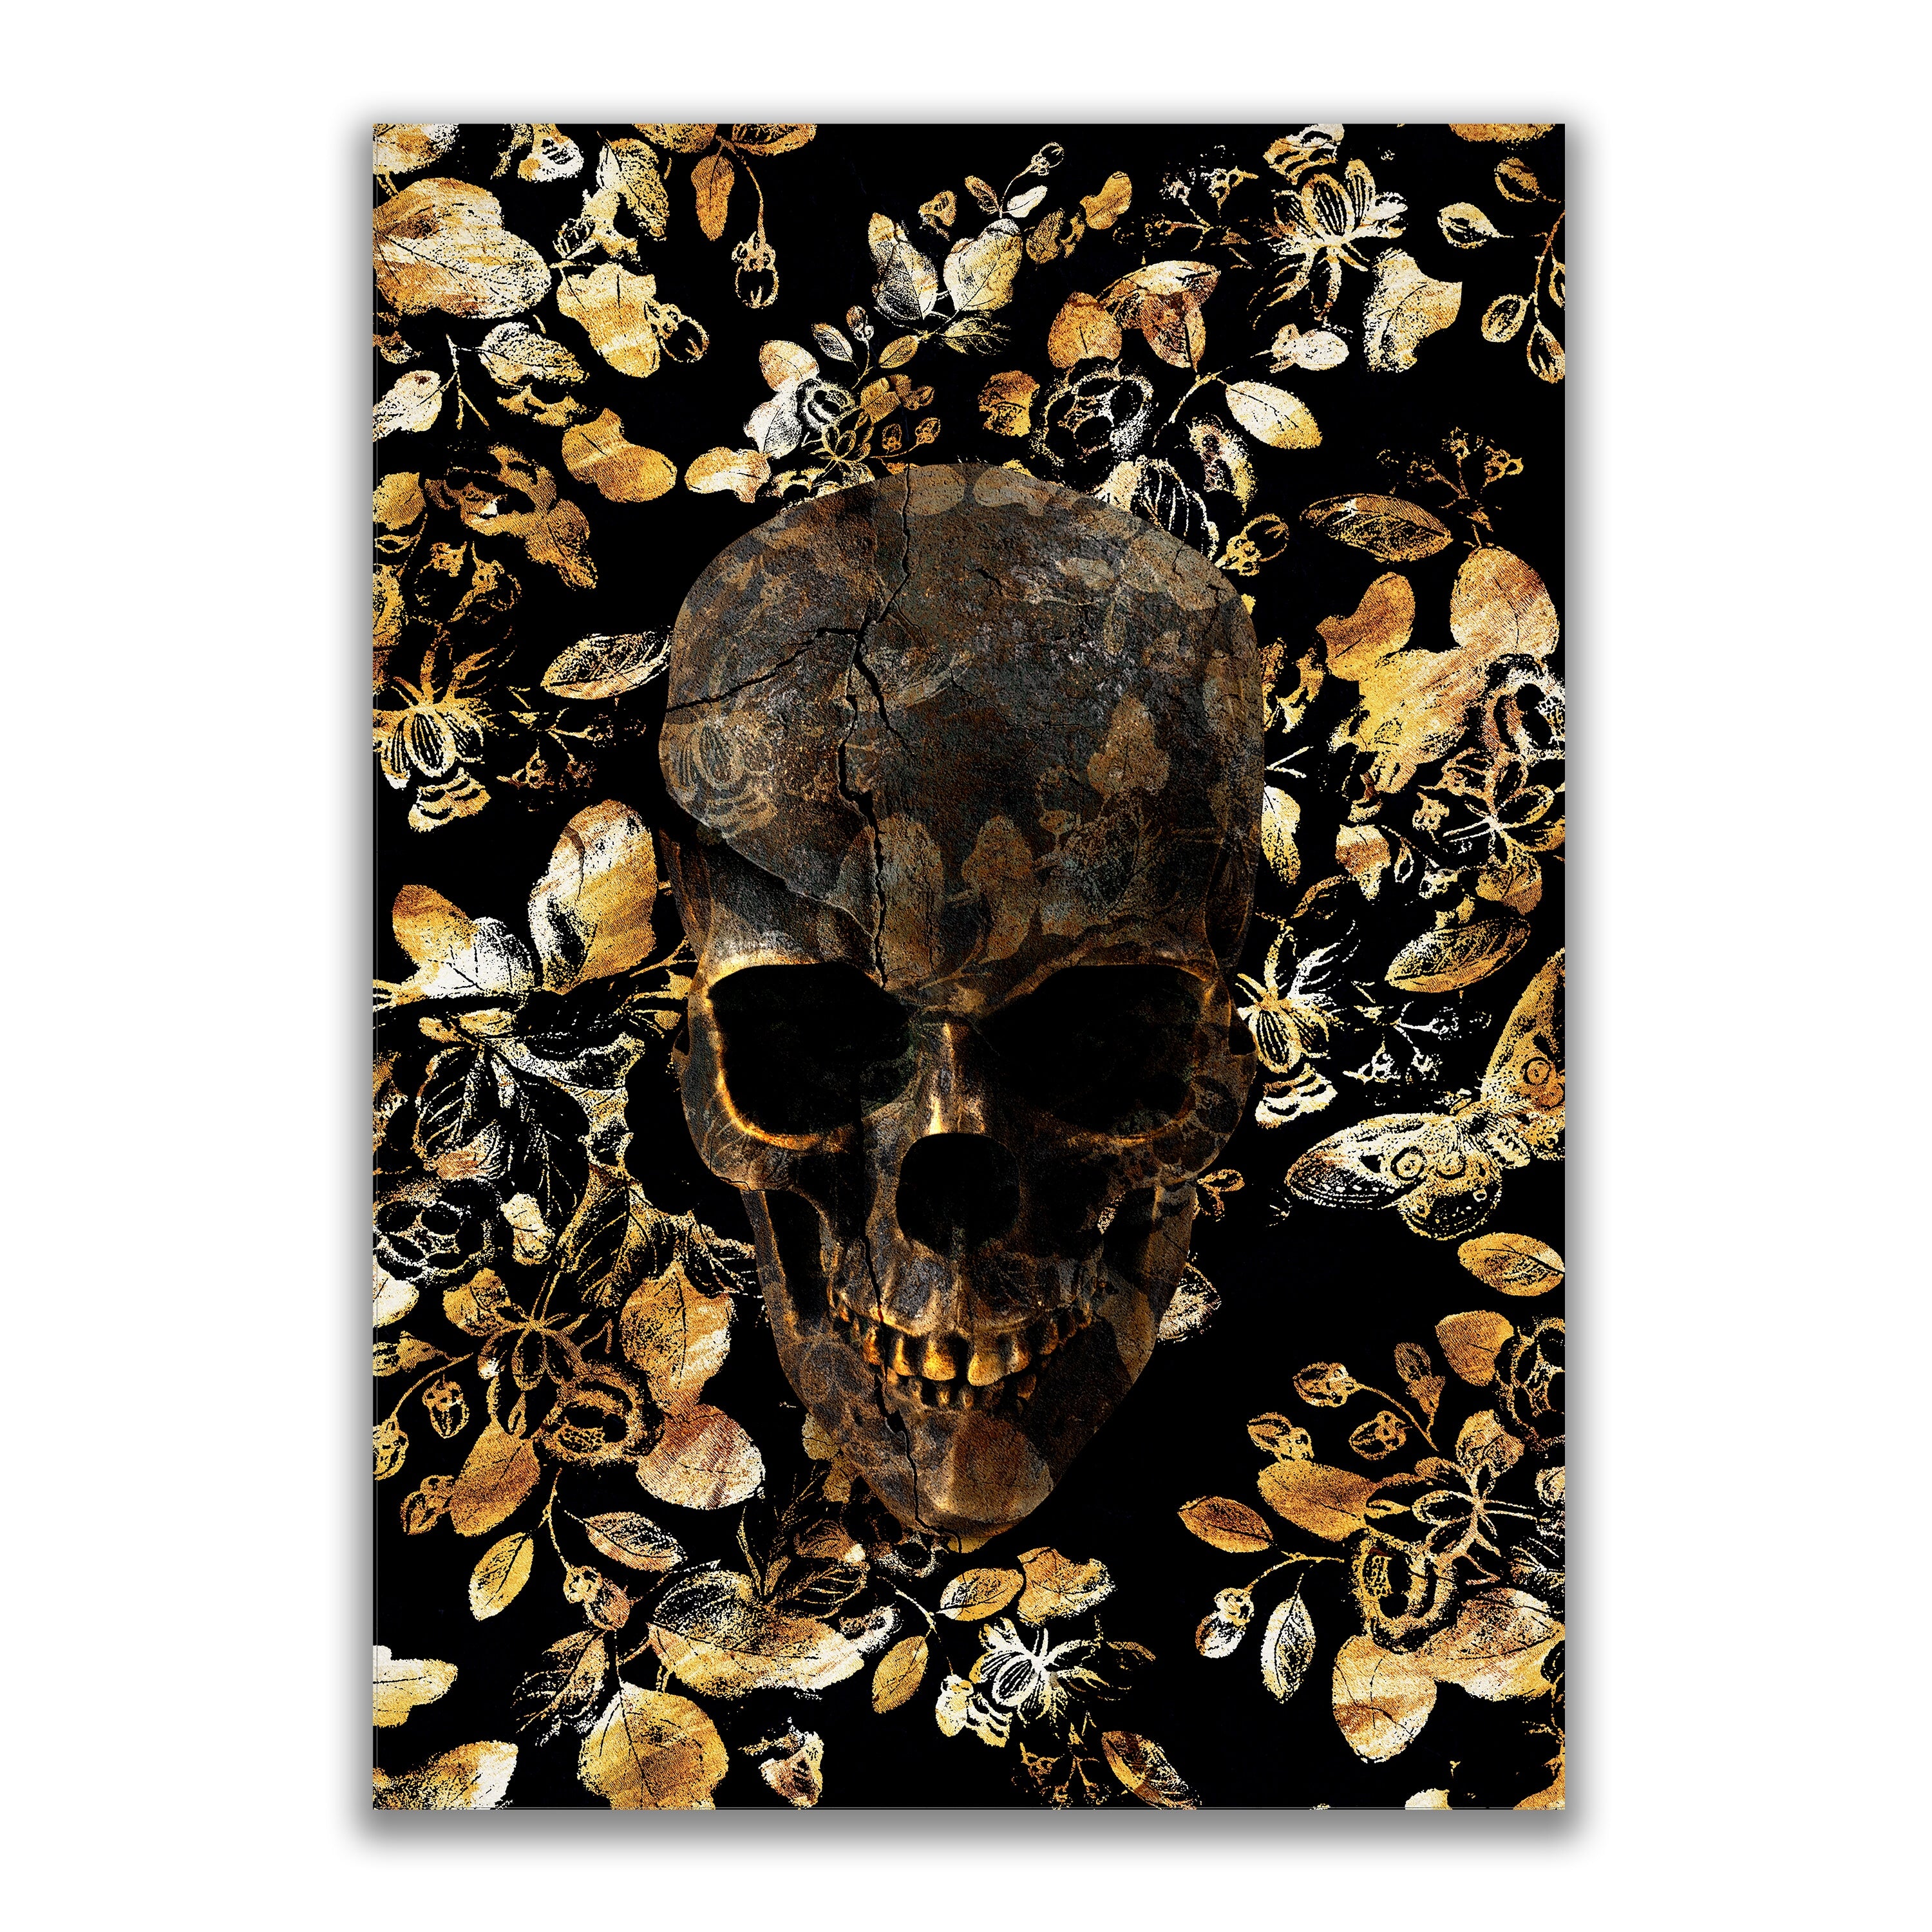 Cracked Gold Skull Print by The Blackened Teeth 